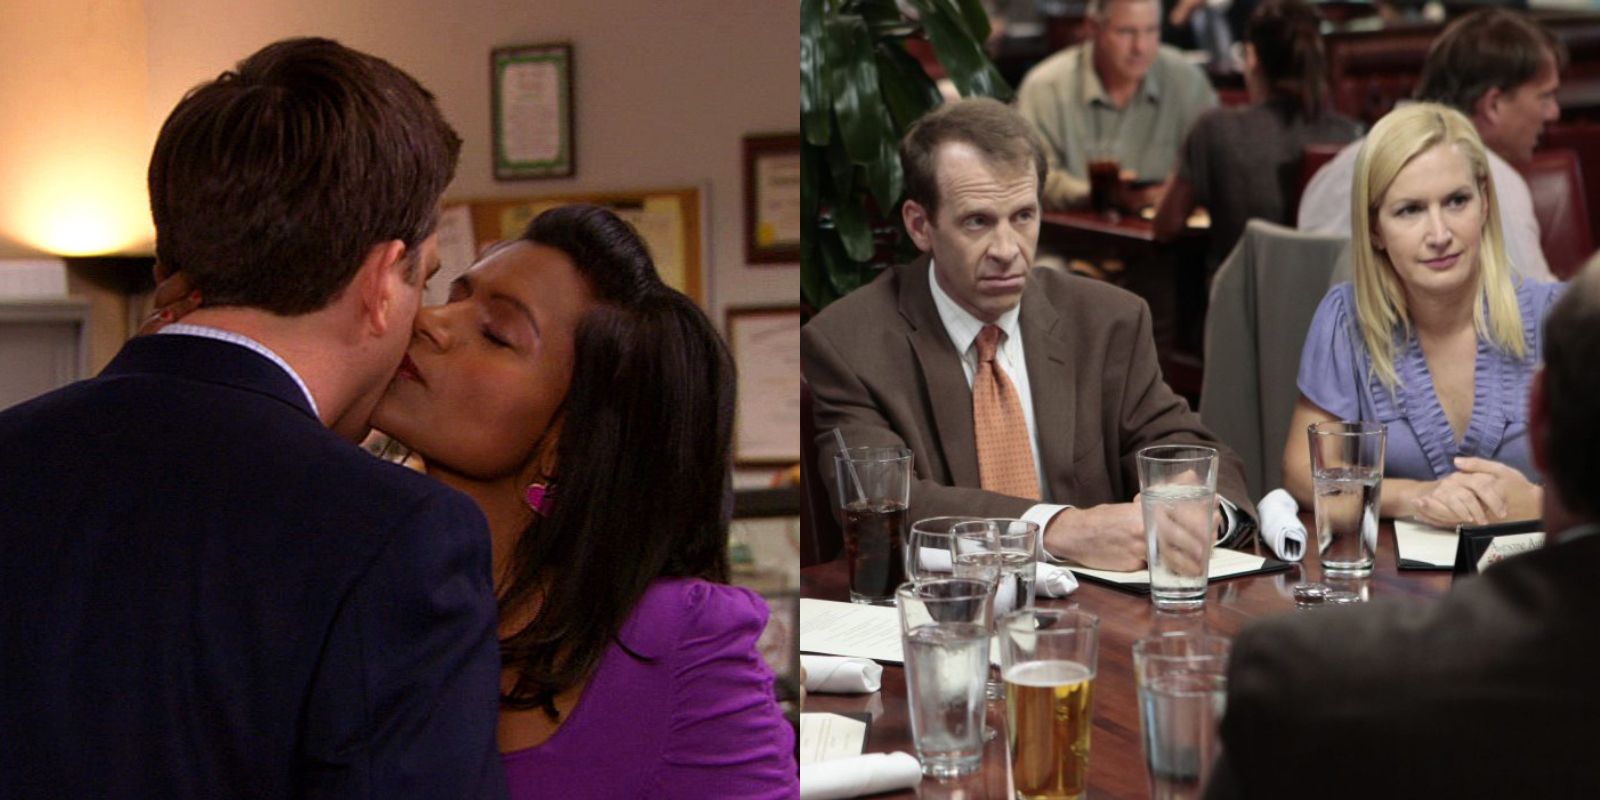 An image of Kelly kissing Andy on the cheek, and Toby and Angela sitting together in The Office